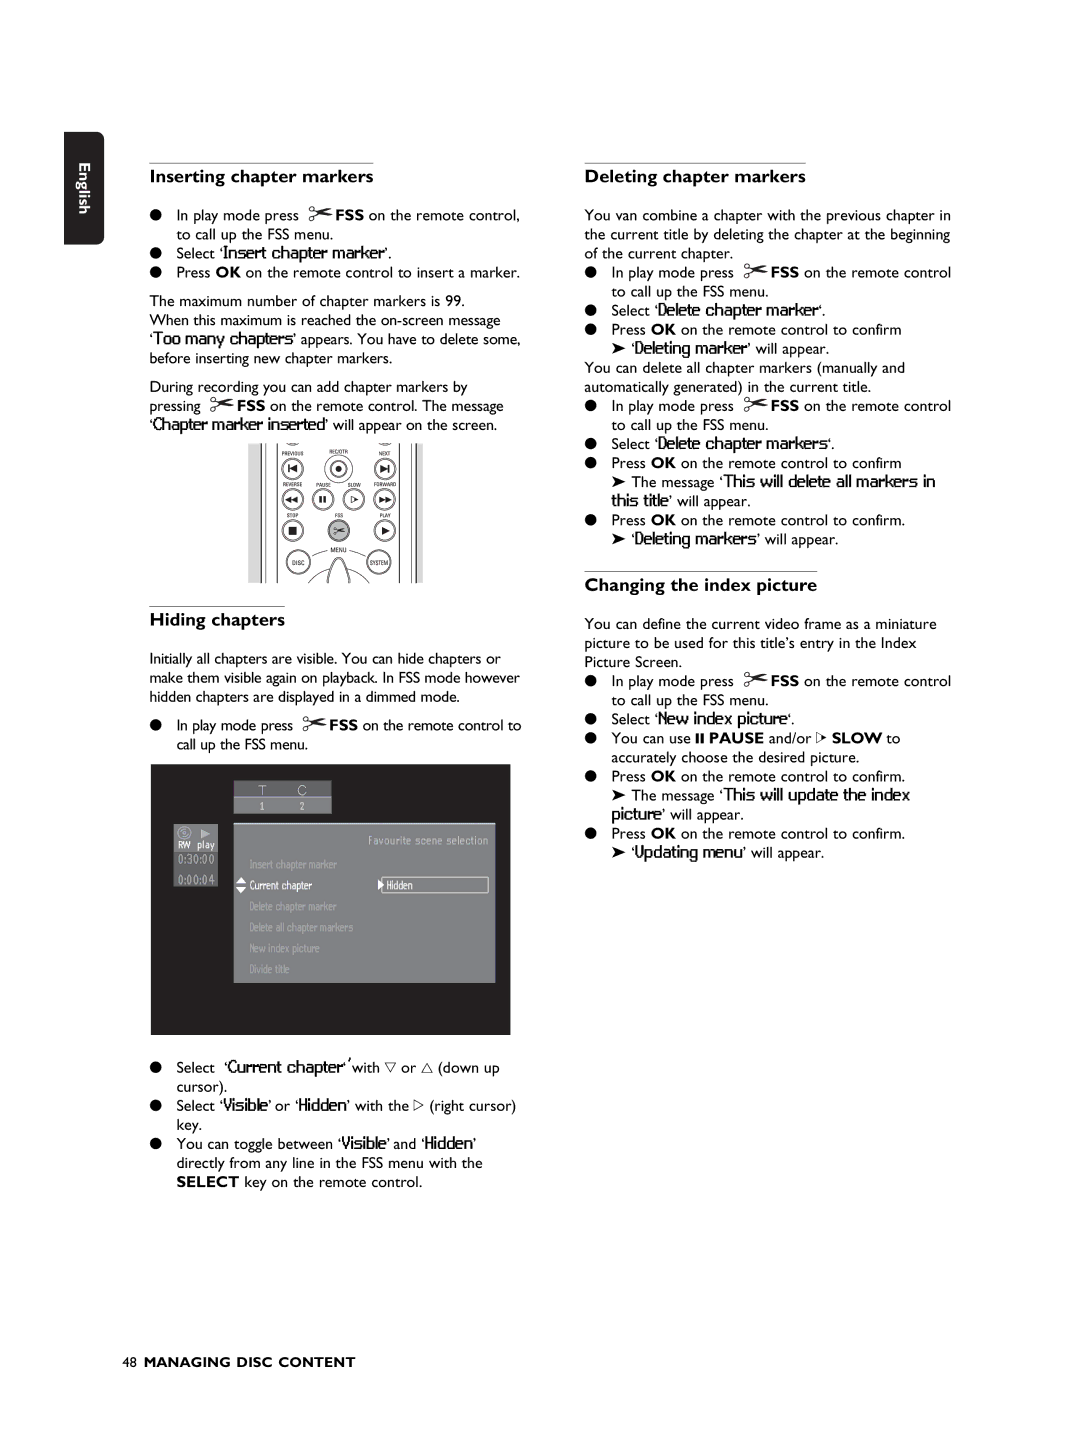 Philips DVDR990 manual Inserting chapter markers, Hiding chapters, Deleting chapter markers, Changing the index picture 